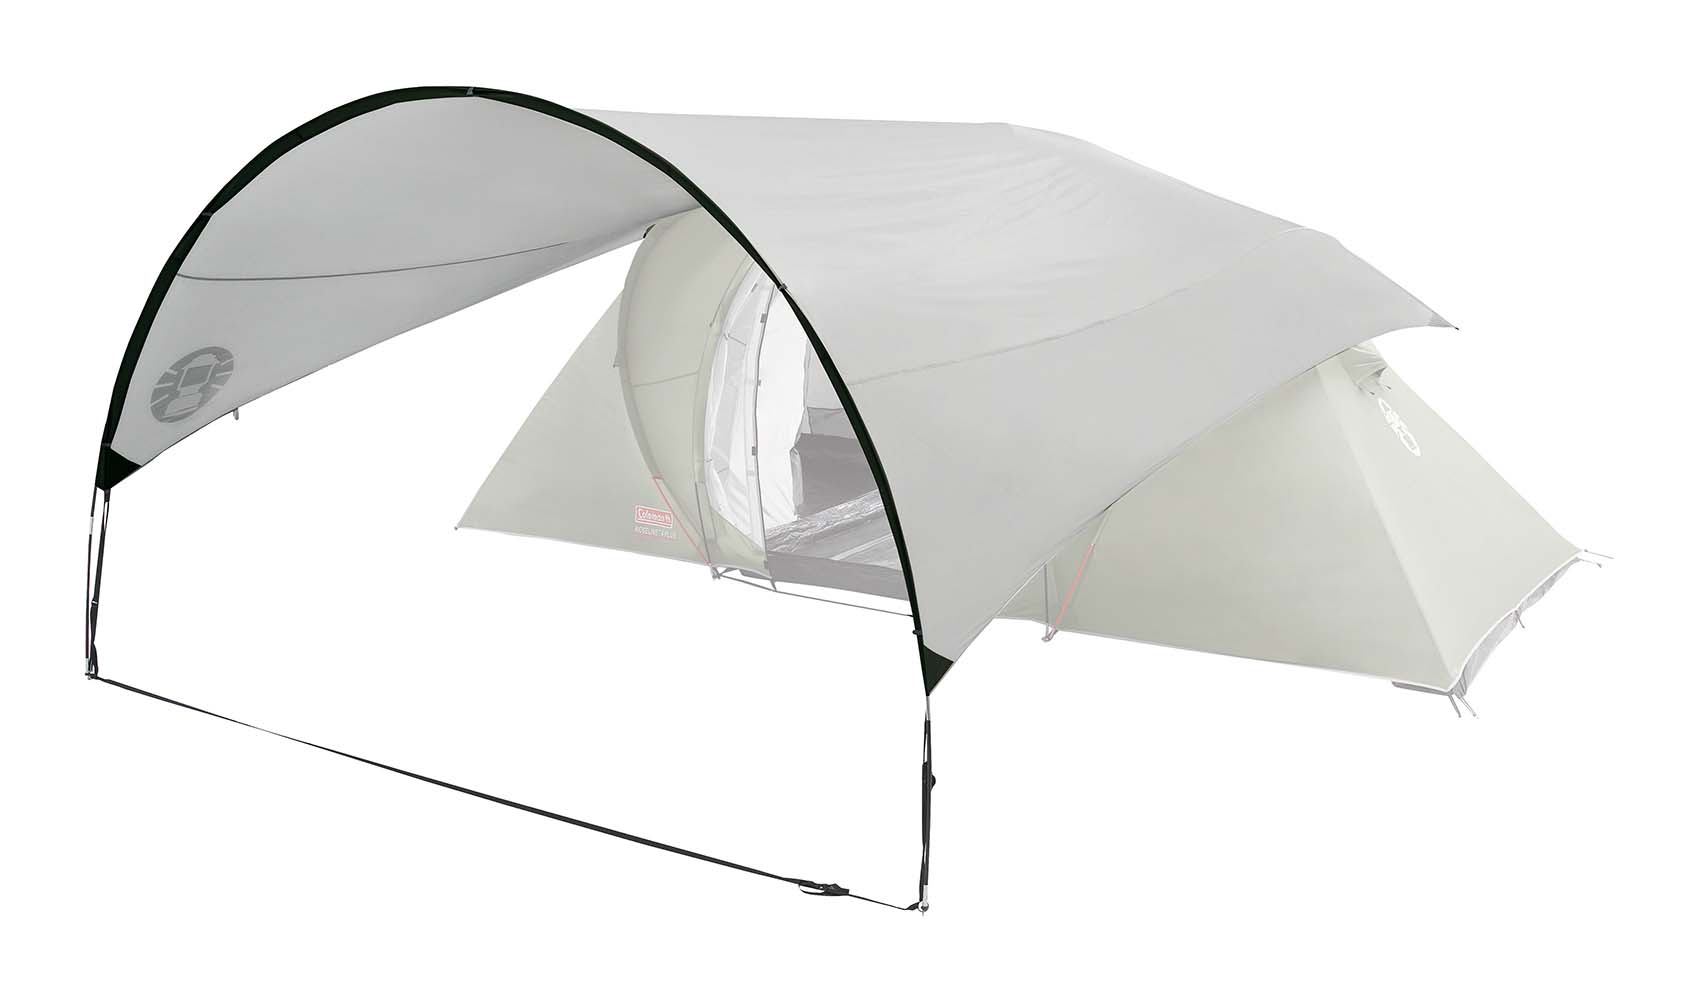 8905081 Universal awning for almost all tunnel tents. Creates a whole lot of extra living space and a shaded area. Supplied with a fibreglass curved pole, pegs and guy ropes. Packed (lxØ) 76x28 cm.